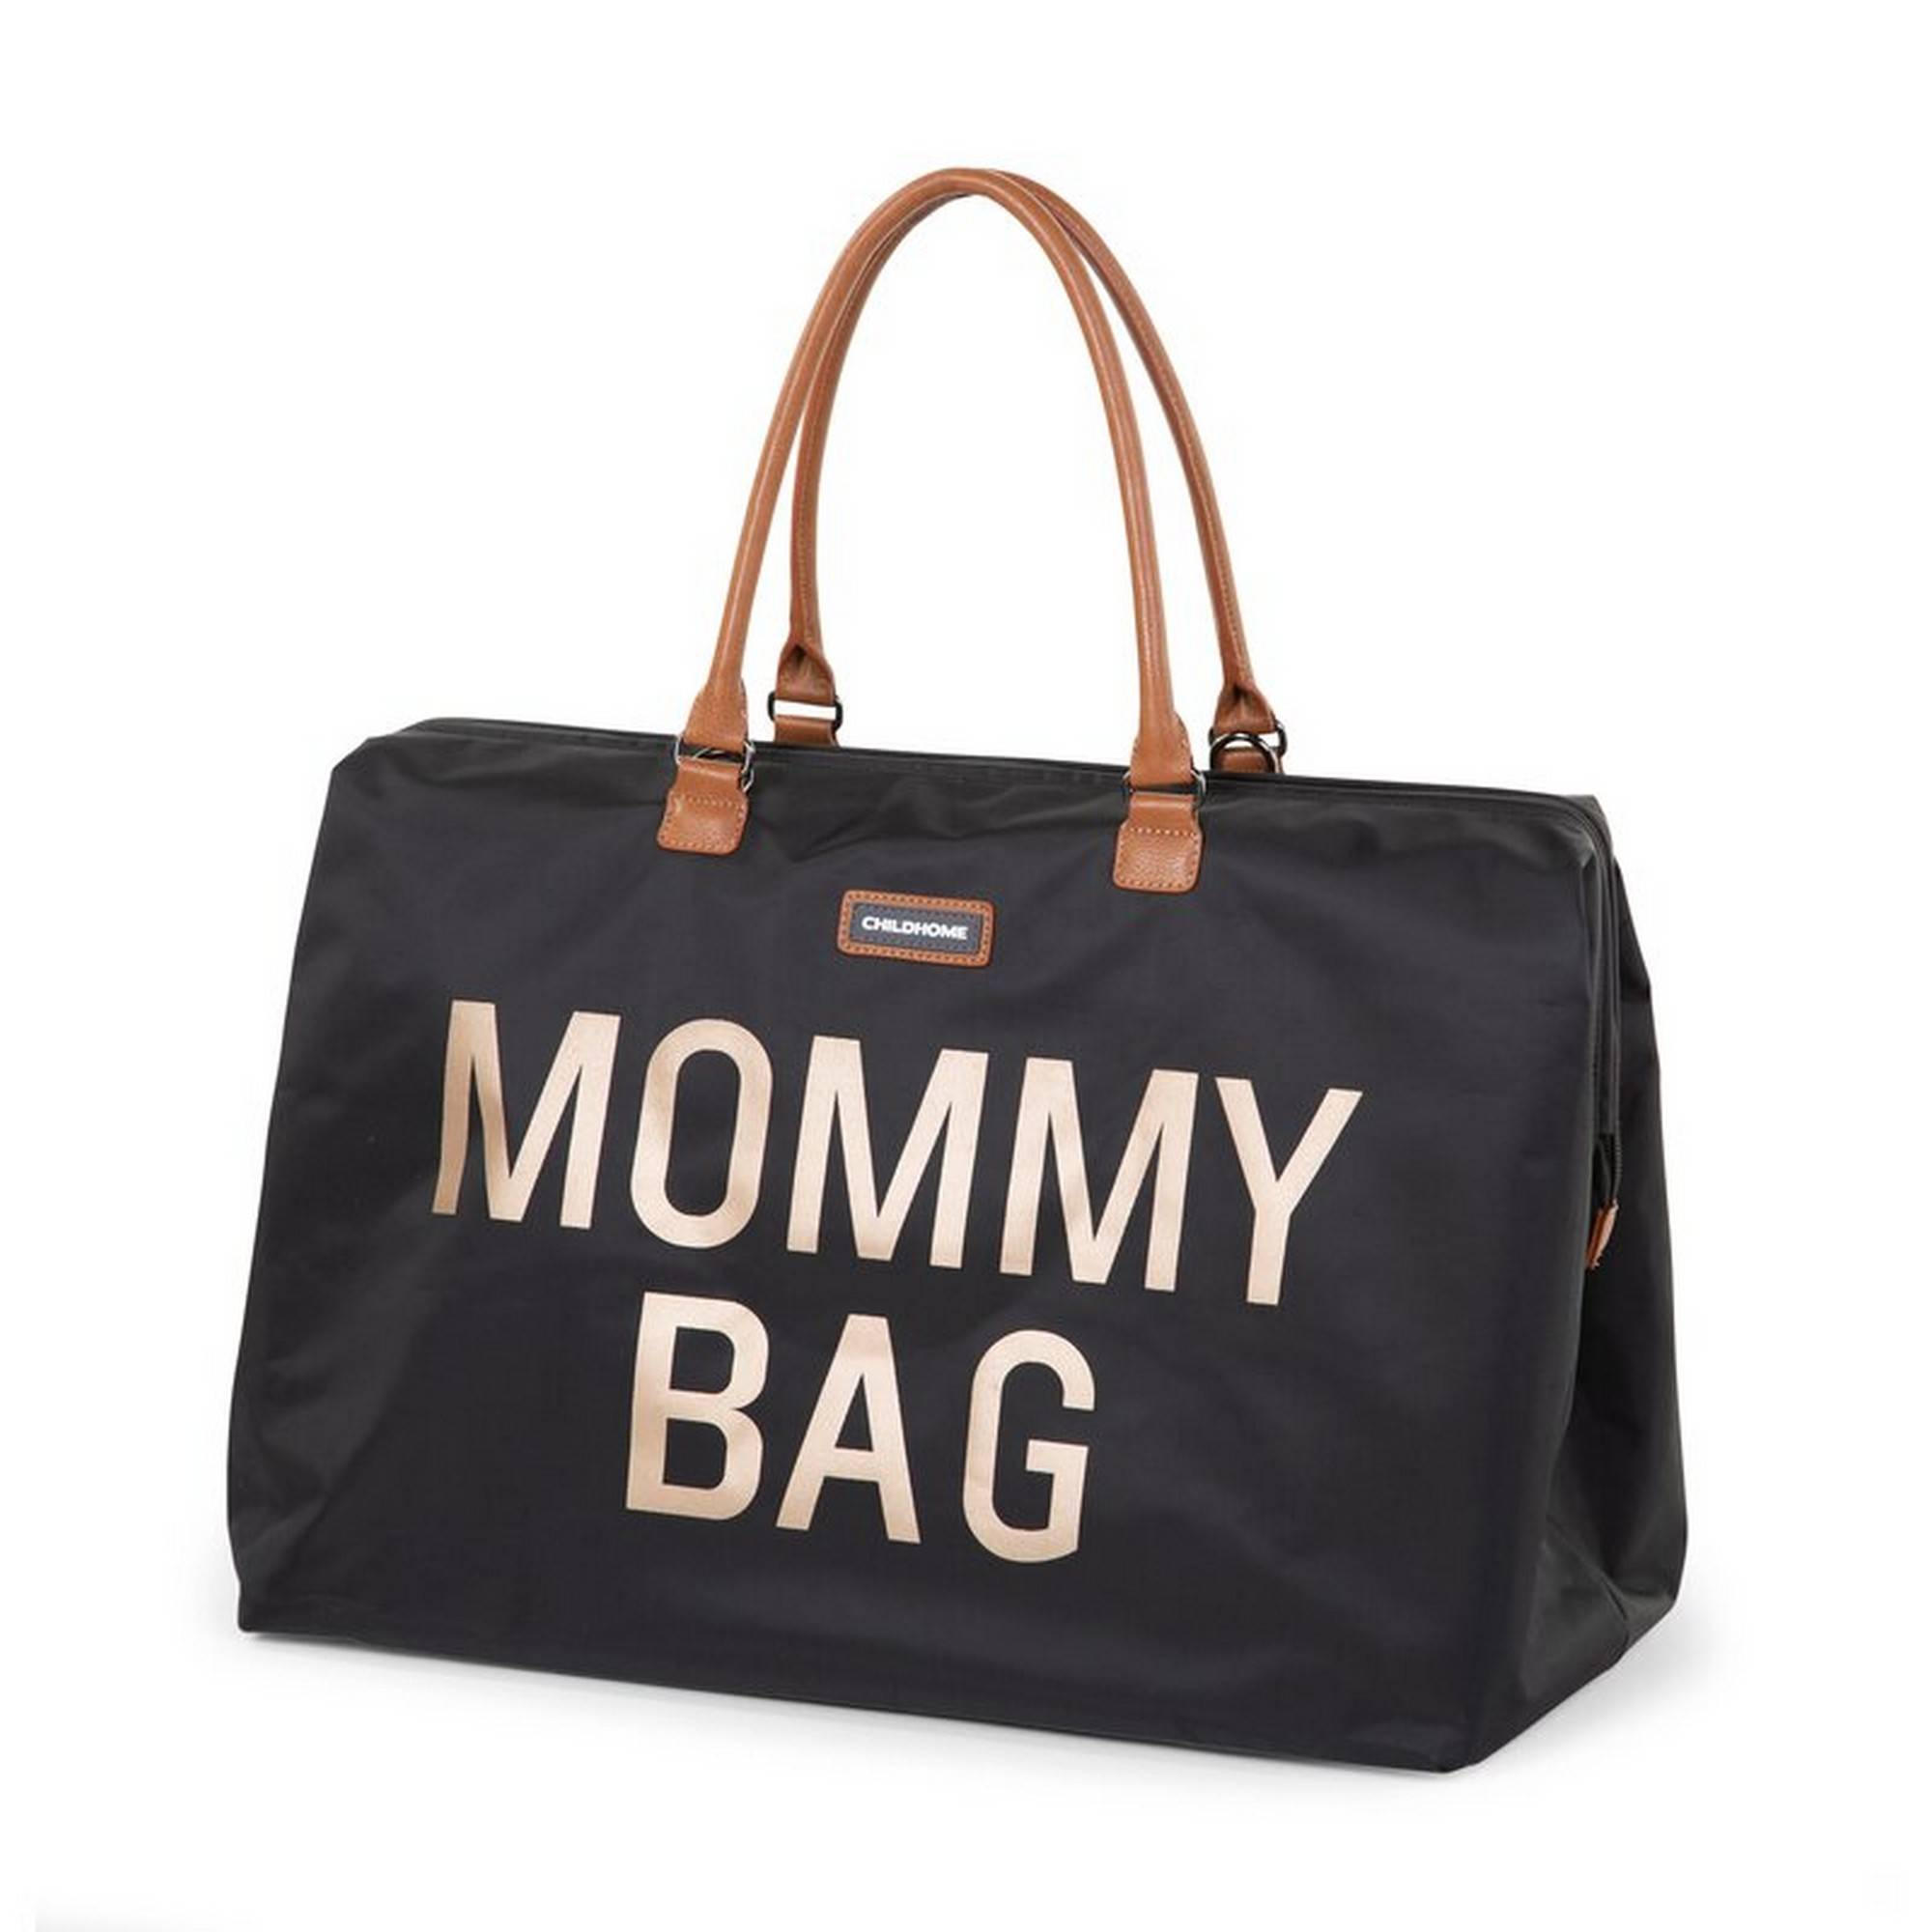 CHILDHOME Mommy Bag - Black/Gold  Mamatoto - Mother & Child Lifestyle Shop